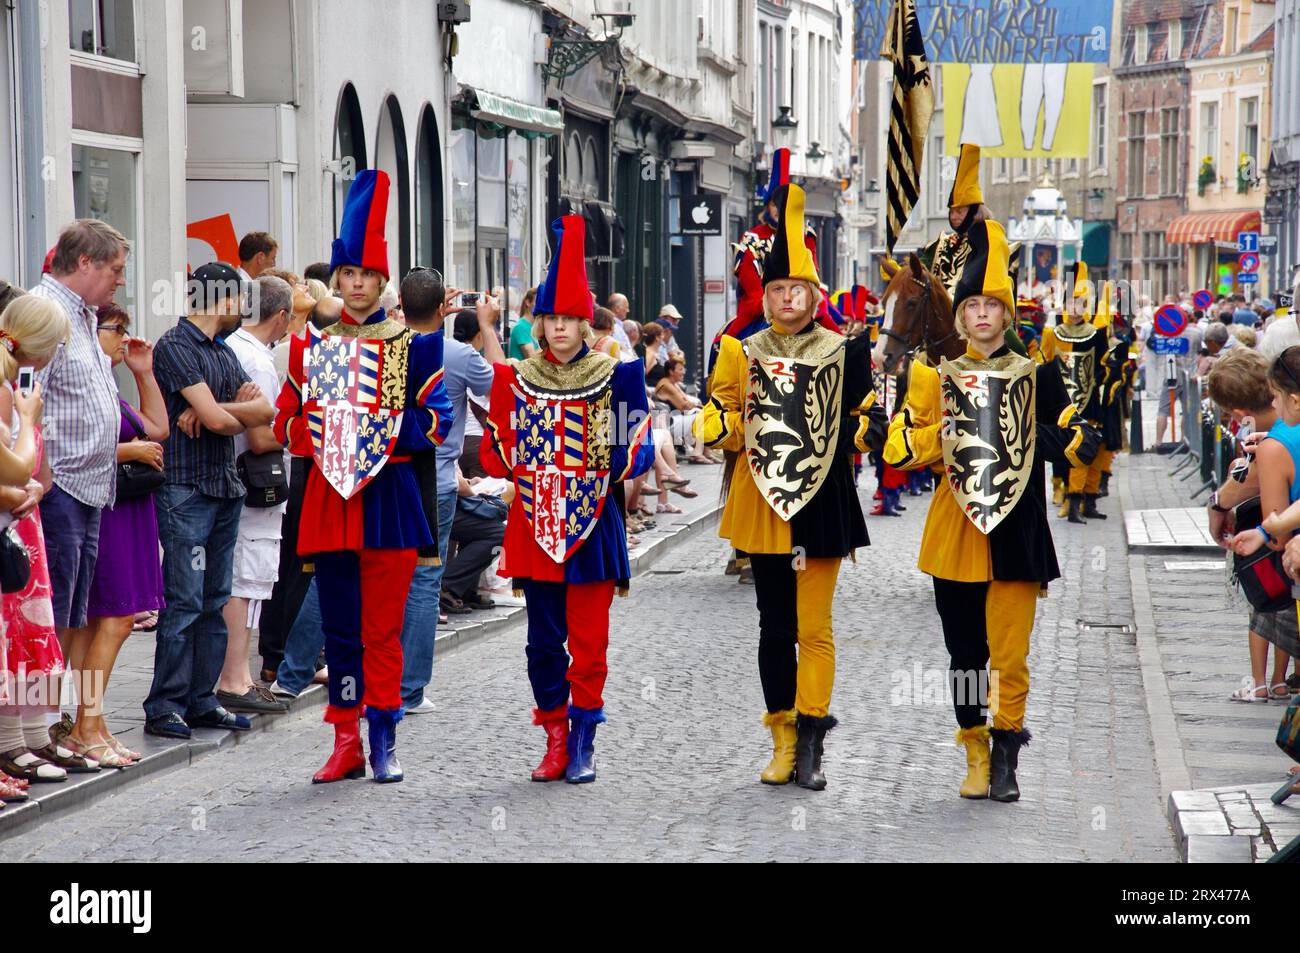 Marchers in colourful outfits in The 2012 Procession of the Golden Tree Pageant, held every 5 years since 1958. Bruges, Belgium. Stock Photo